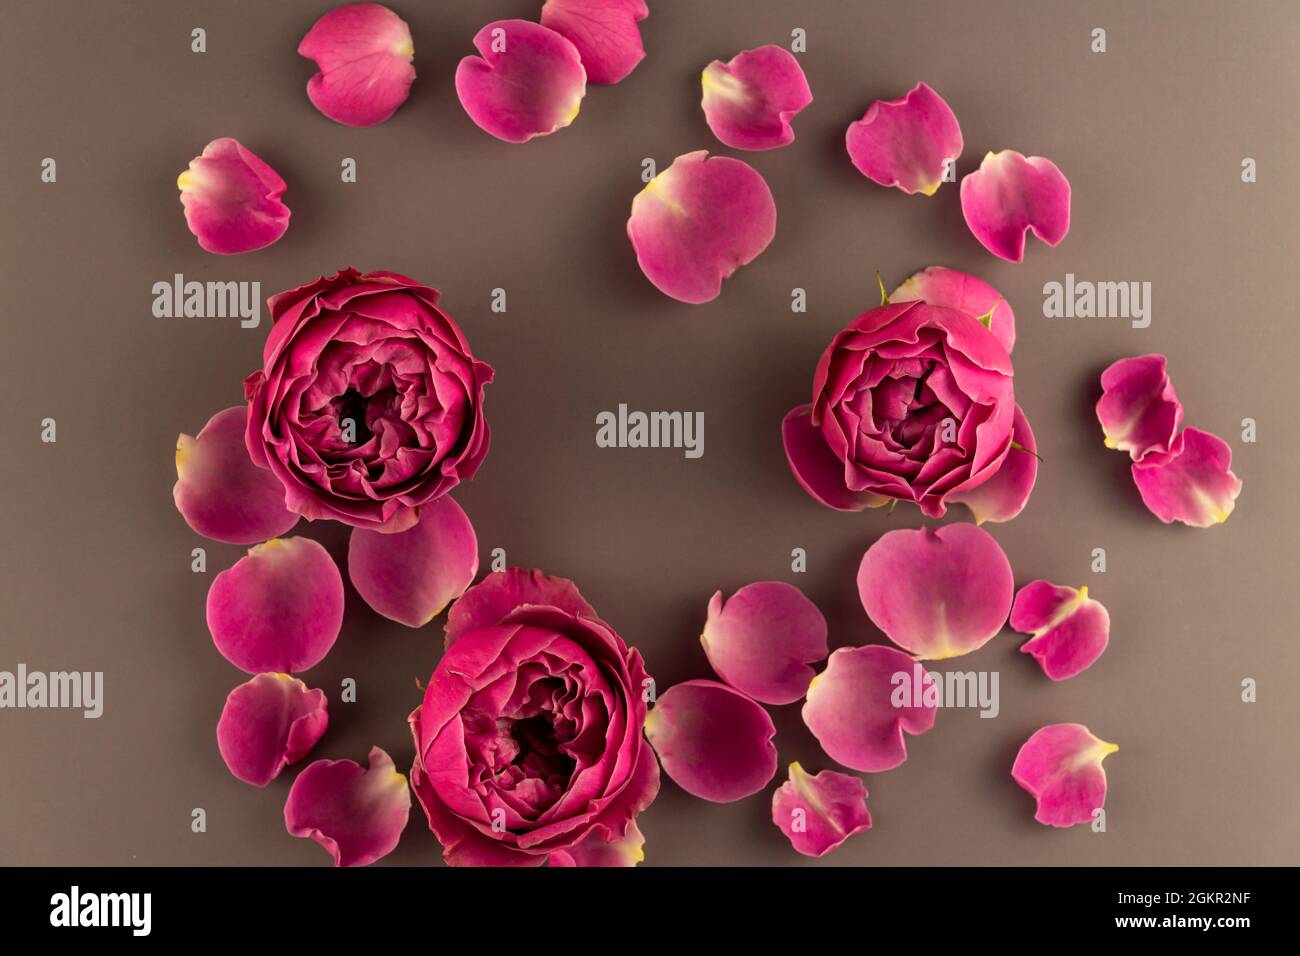 Top view of blooming rose flover on brown background. Festive greeting card, flower arrangement. Top view. Stock Photo